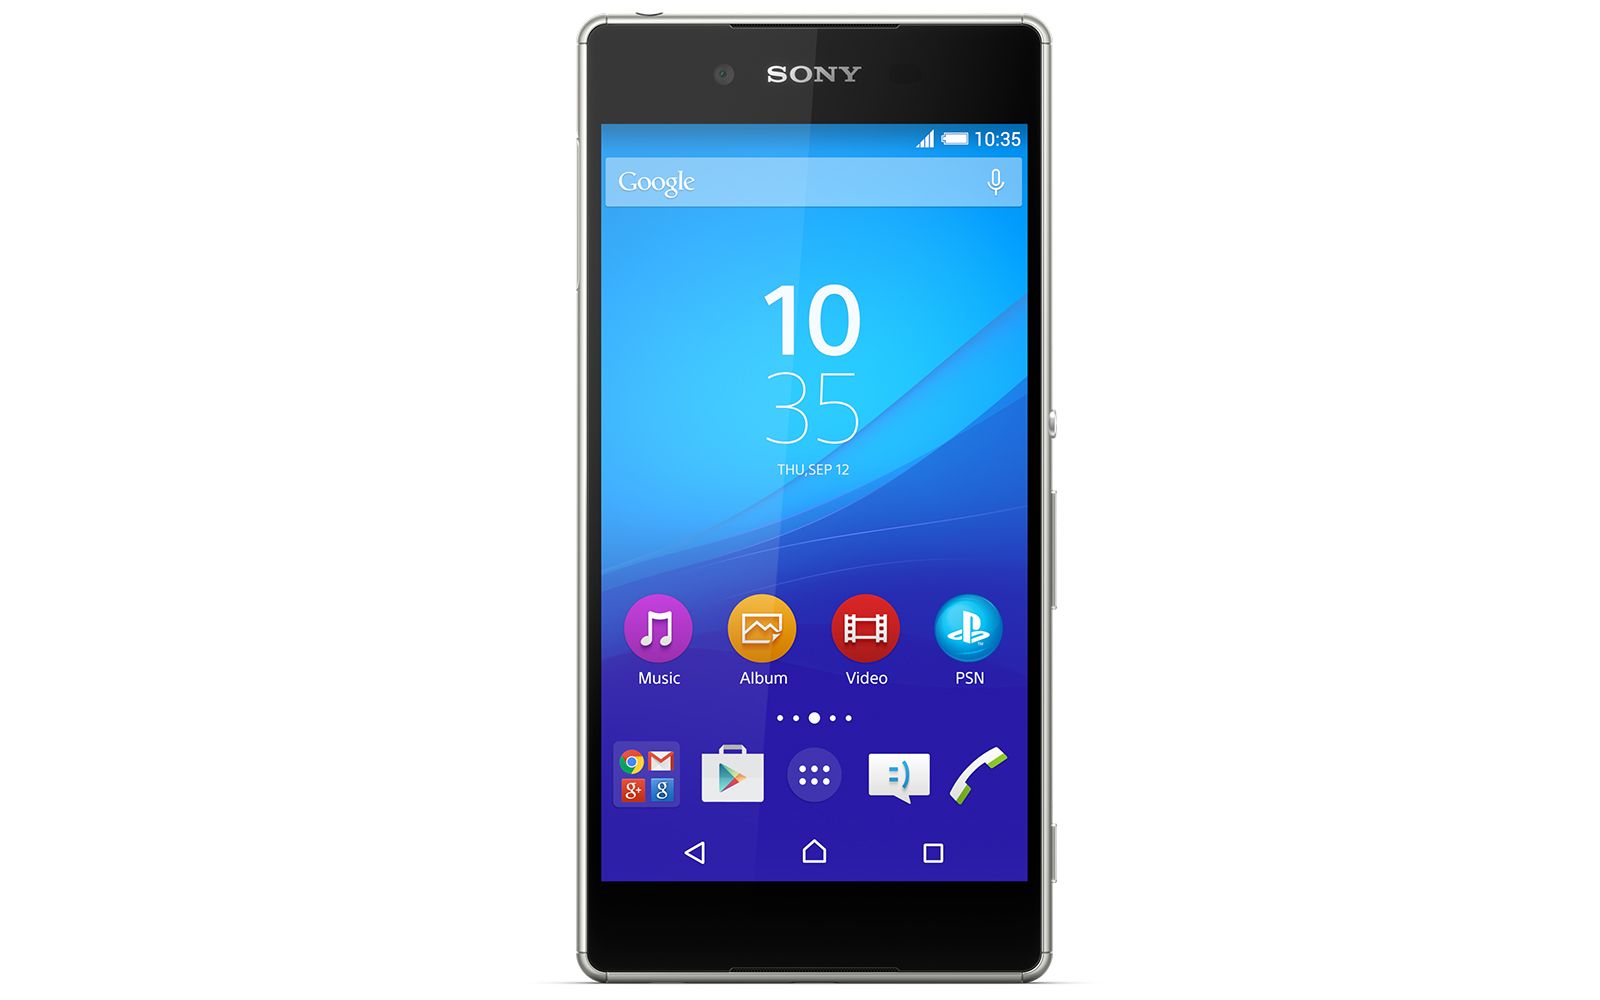 sony xperia z4 is official slimmer 64 bit octa core and more out this summer image 1